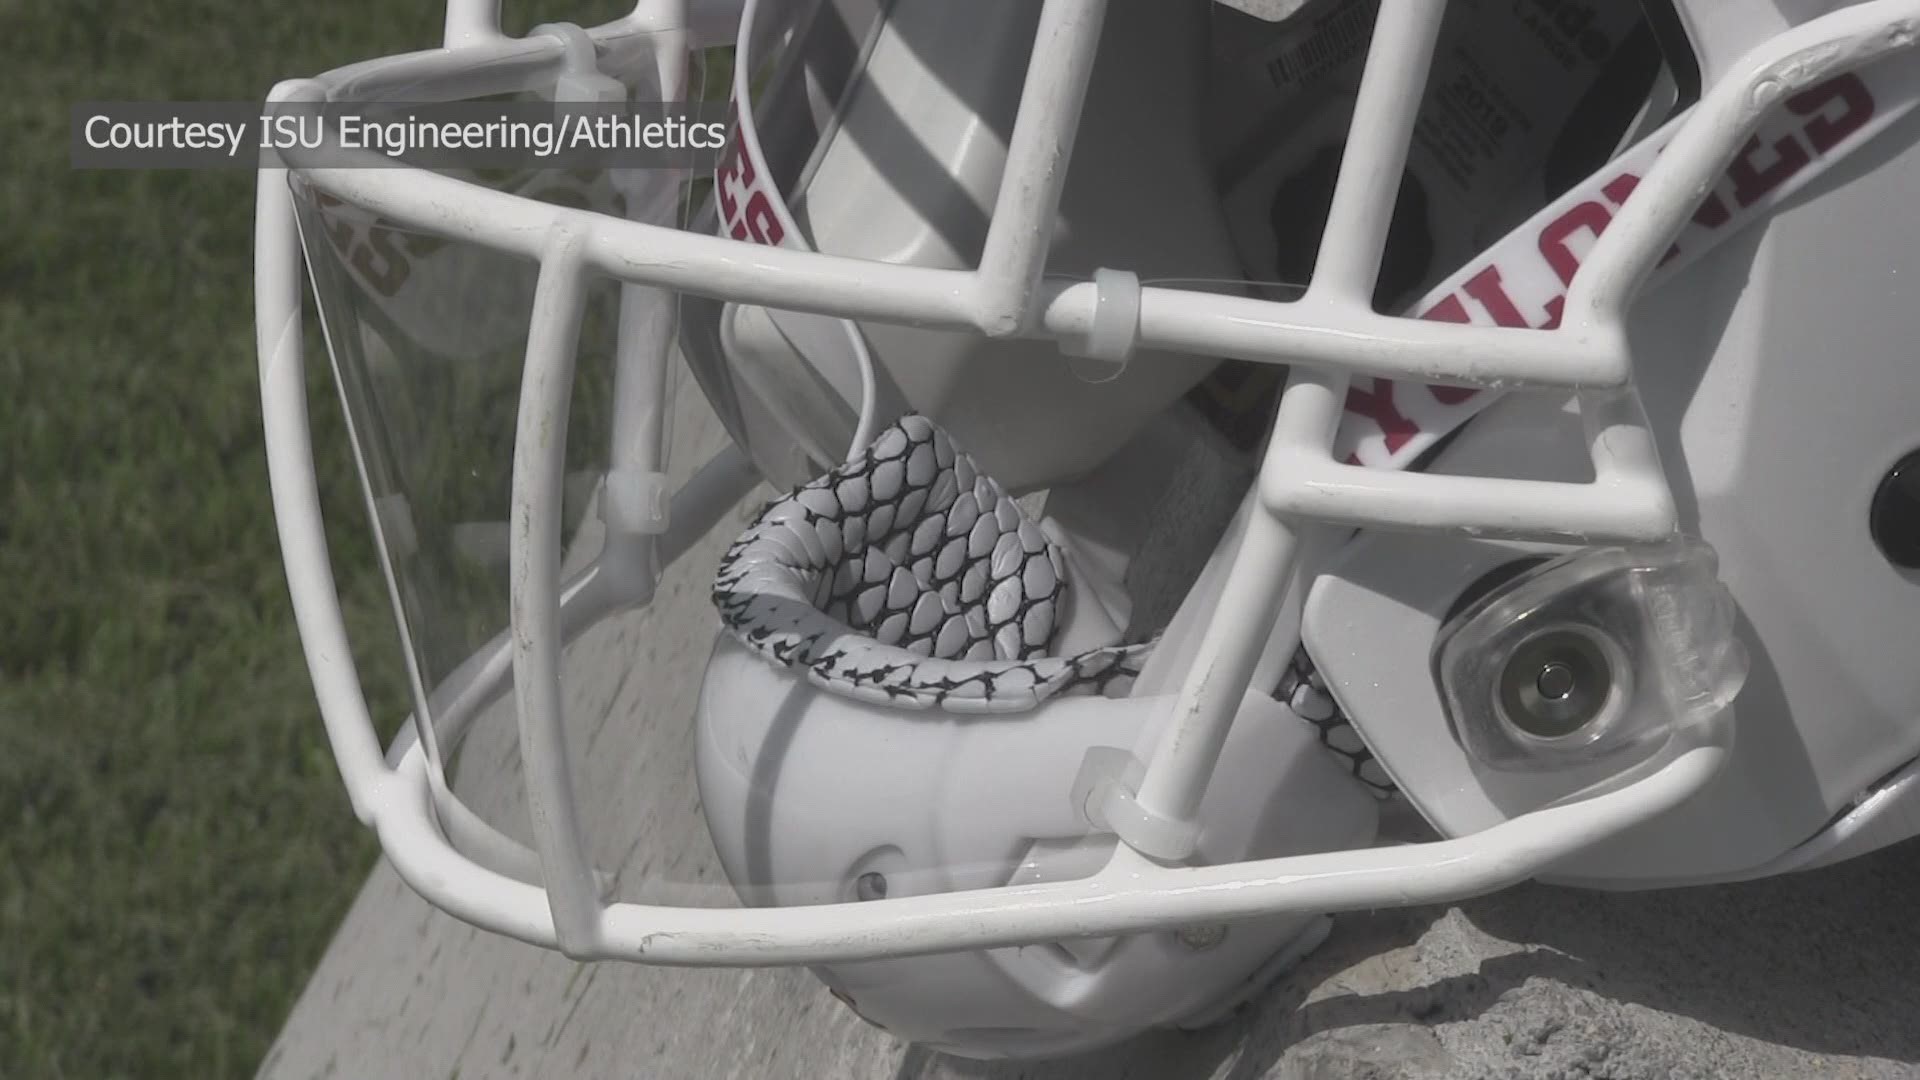 Iowa State Football and the ISU Industrial Engineering department partnered to make the "Cyclone Shield" for players.